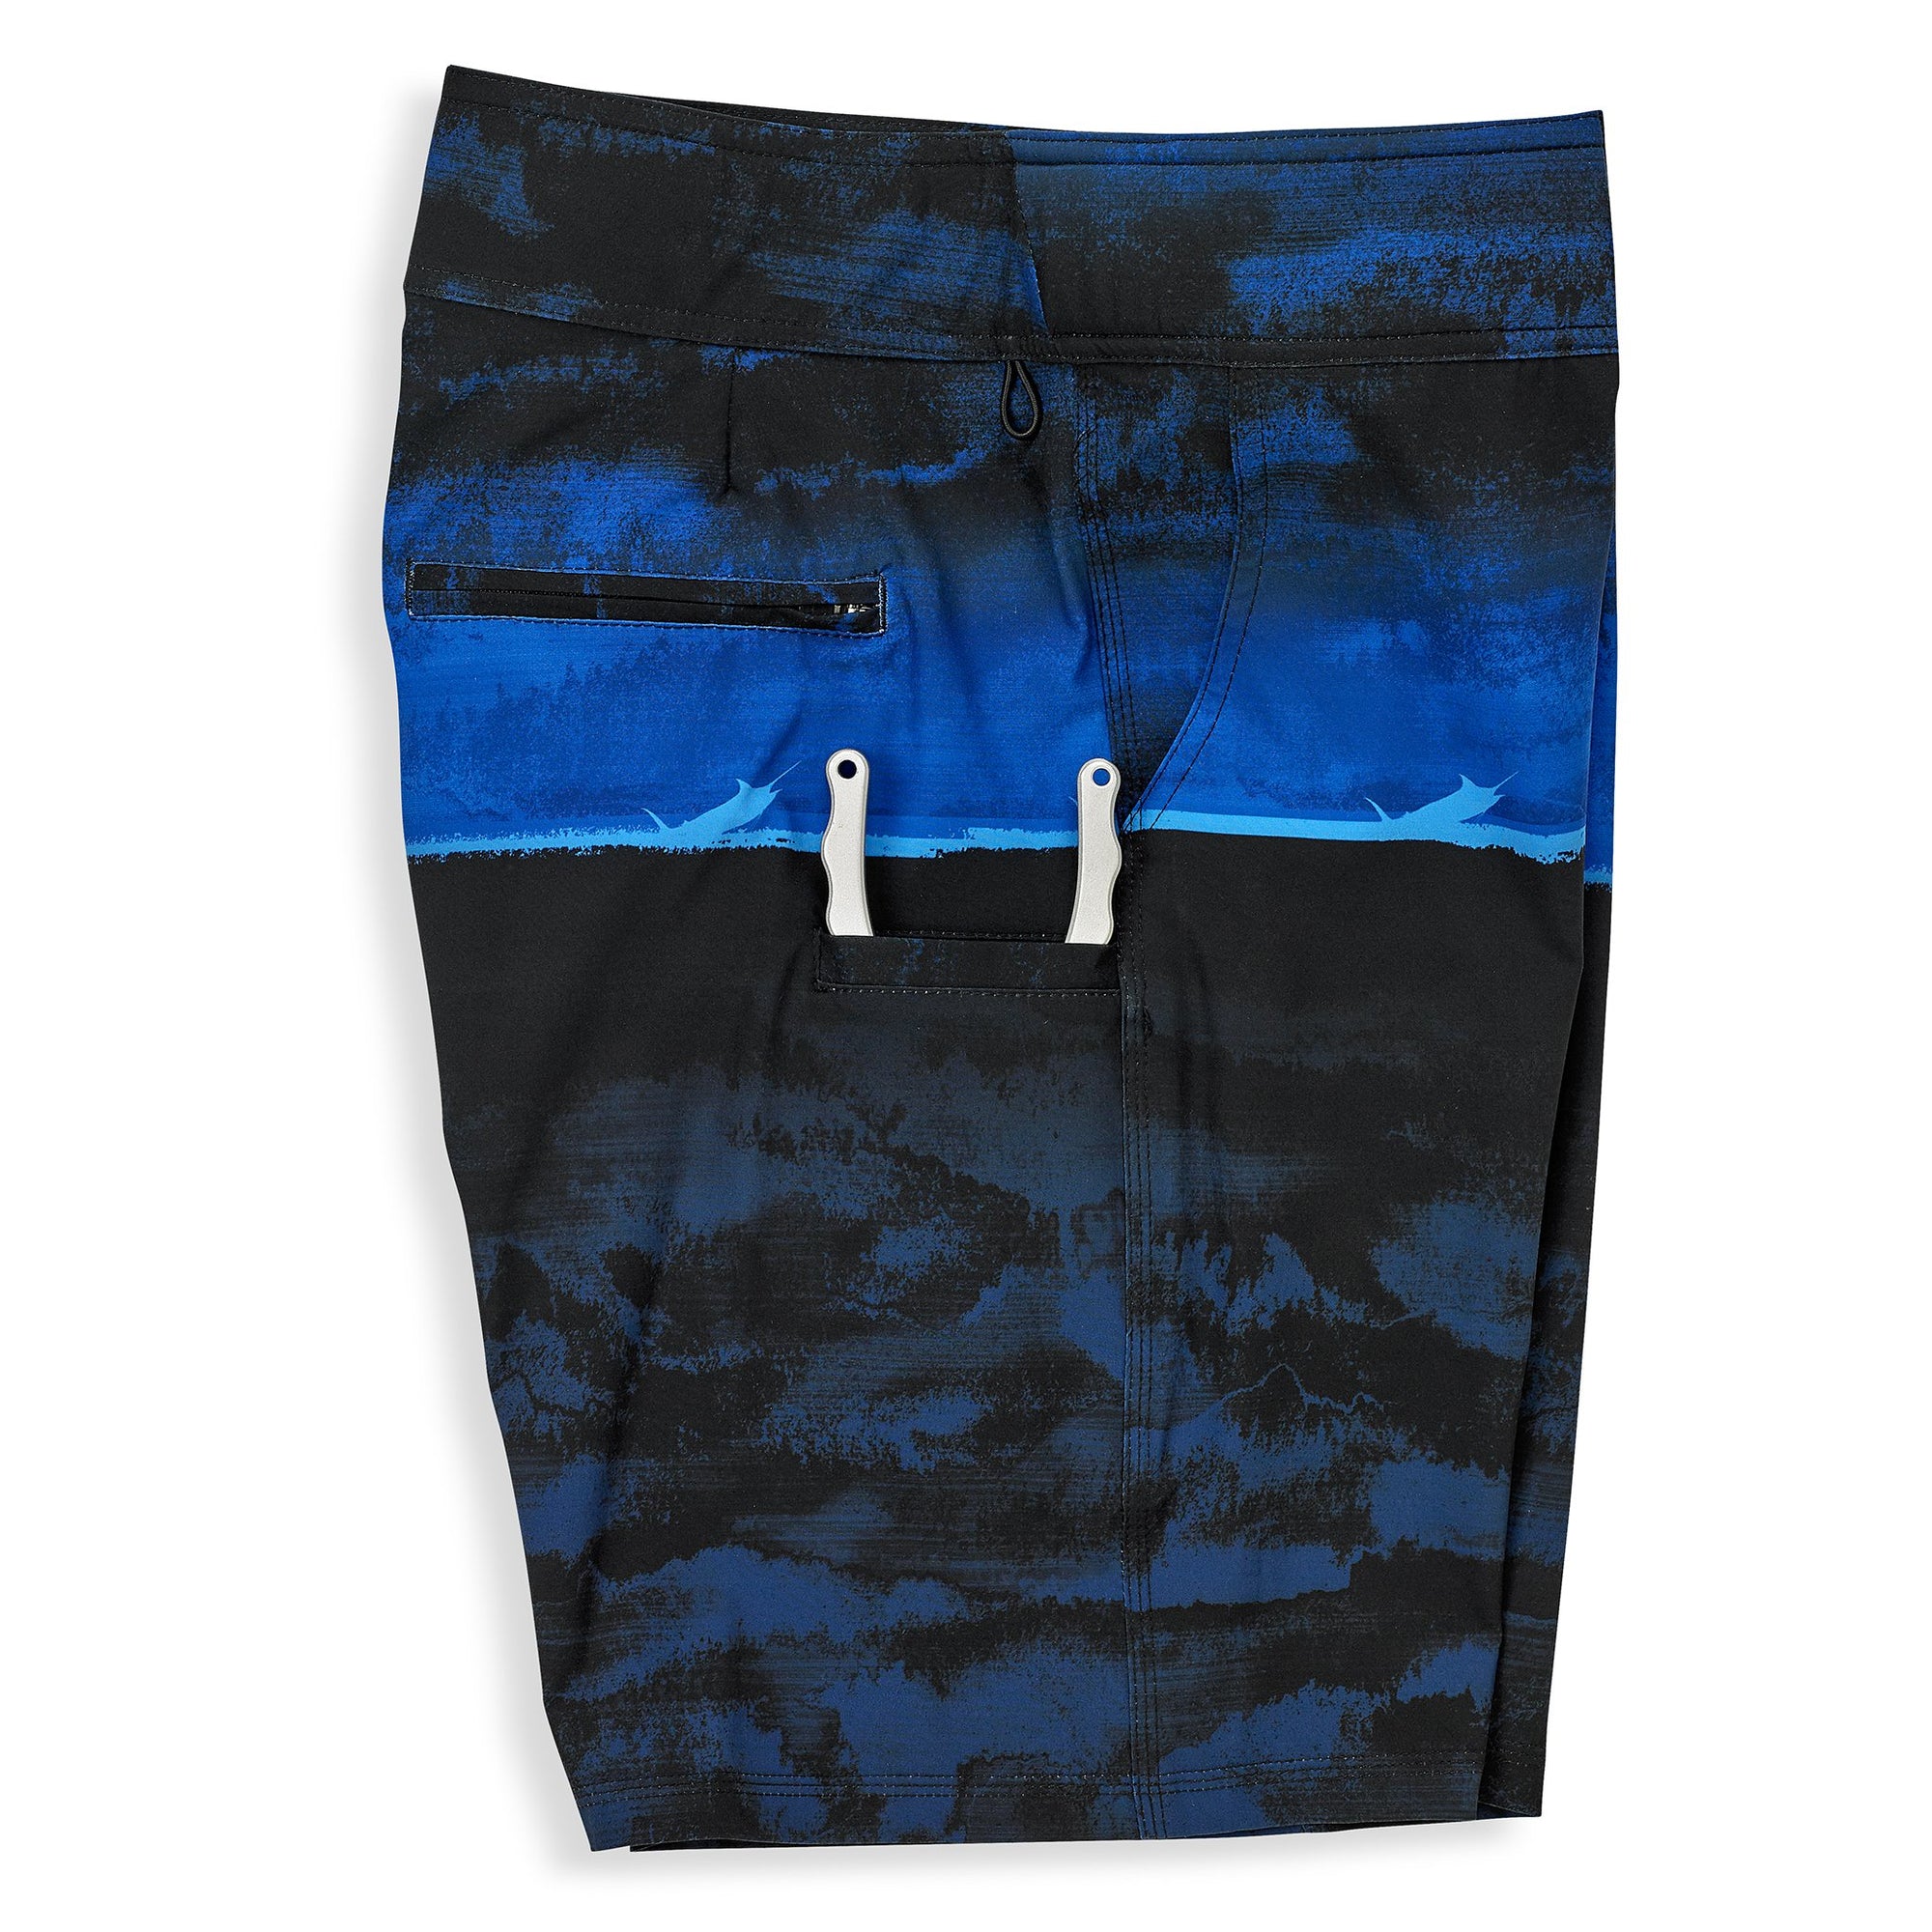 Scales Gear First Mates Boardshorts In The Spread Electric Blue - Side View